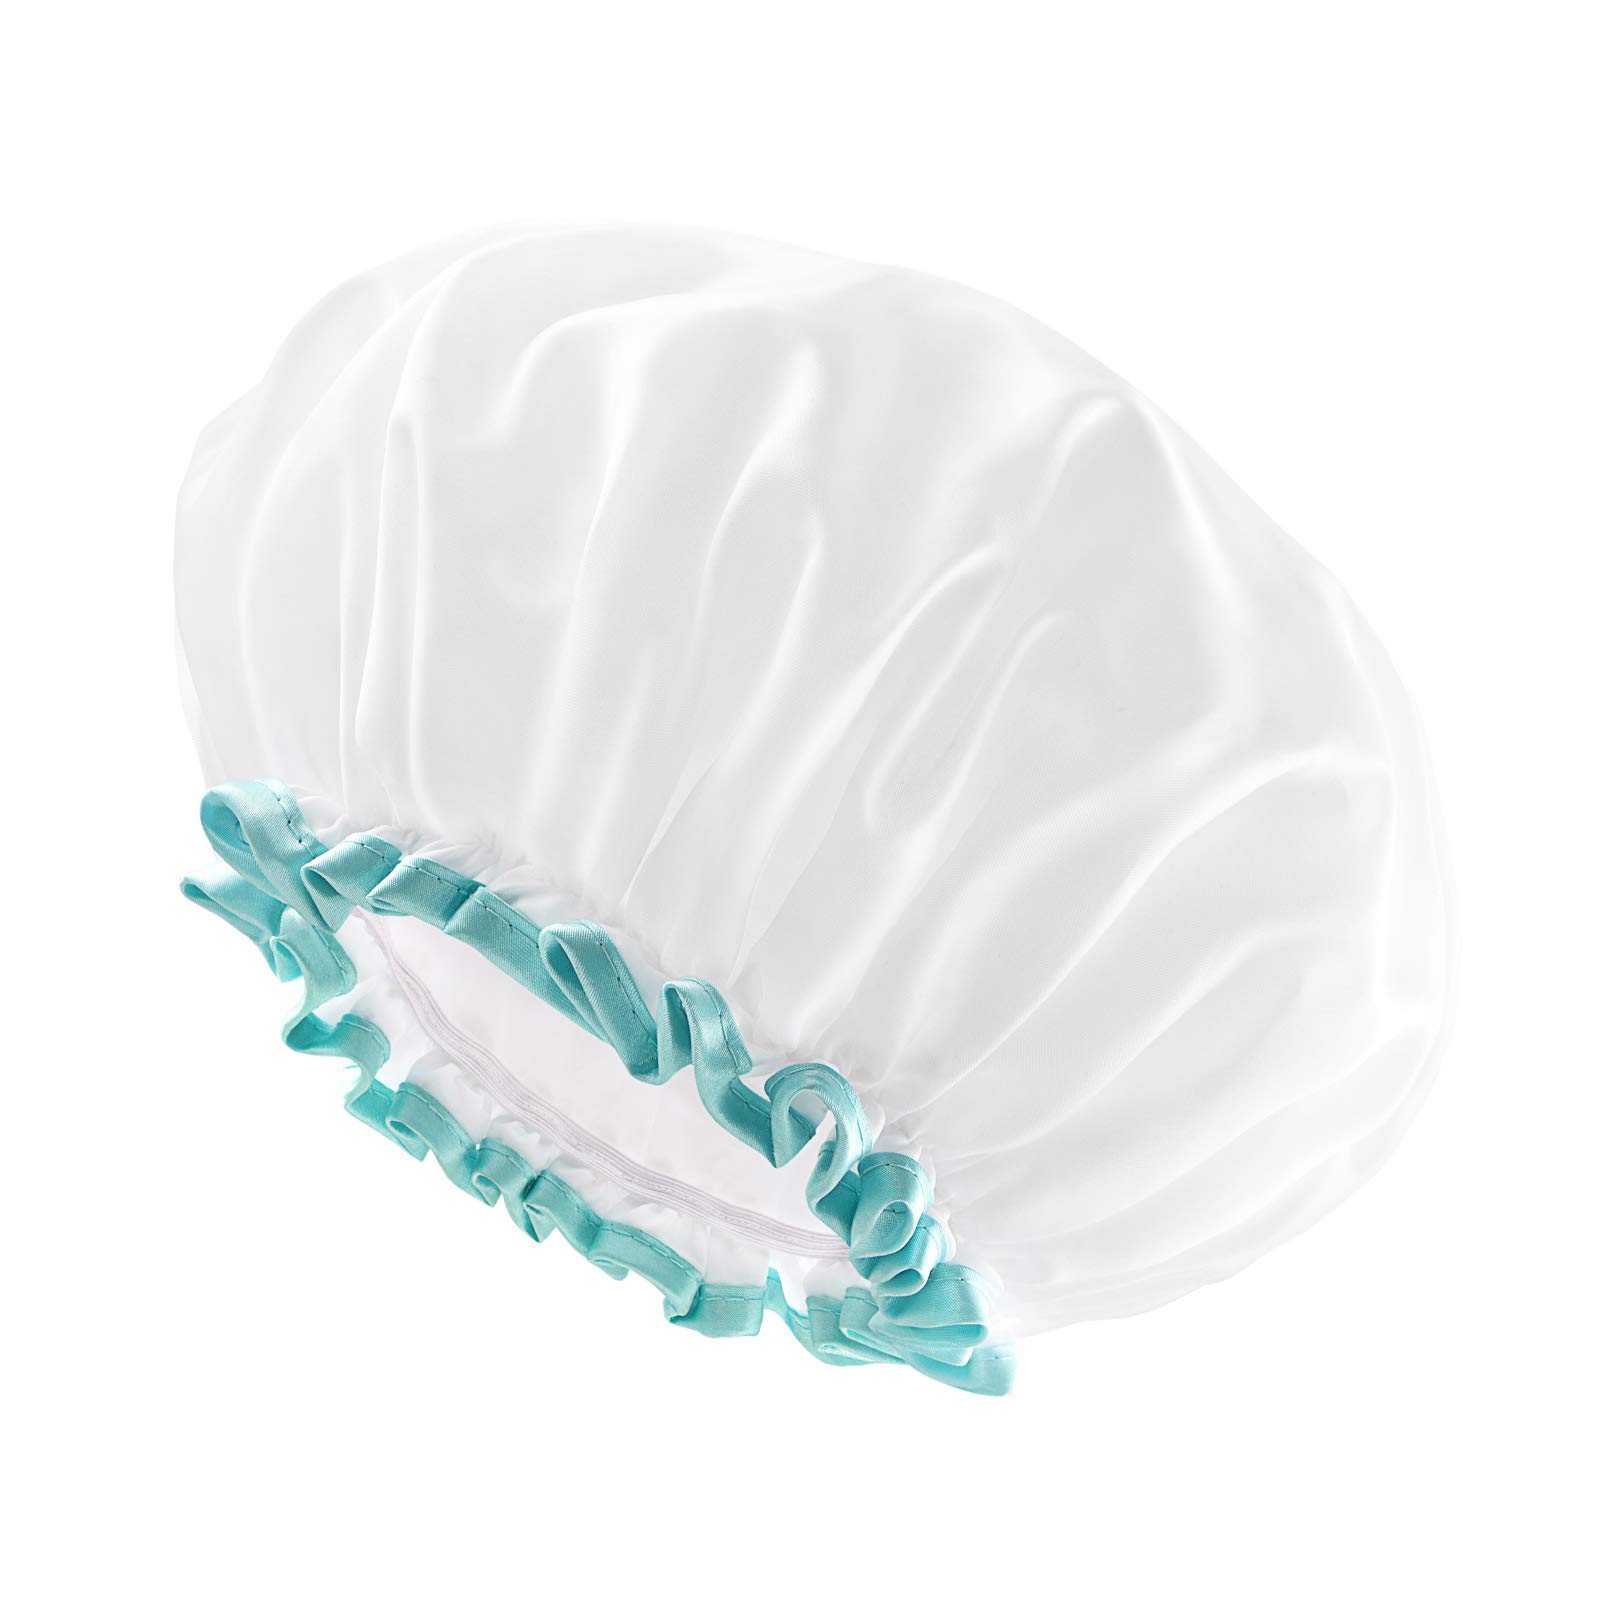 mikimini Shower Cap for Women and Girls,Reusable,Waterproof, Washable, Cute and Soft,White